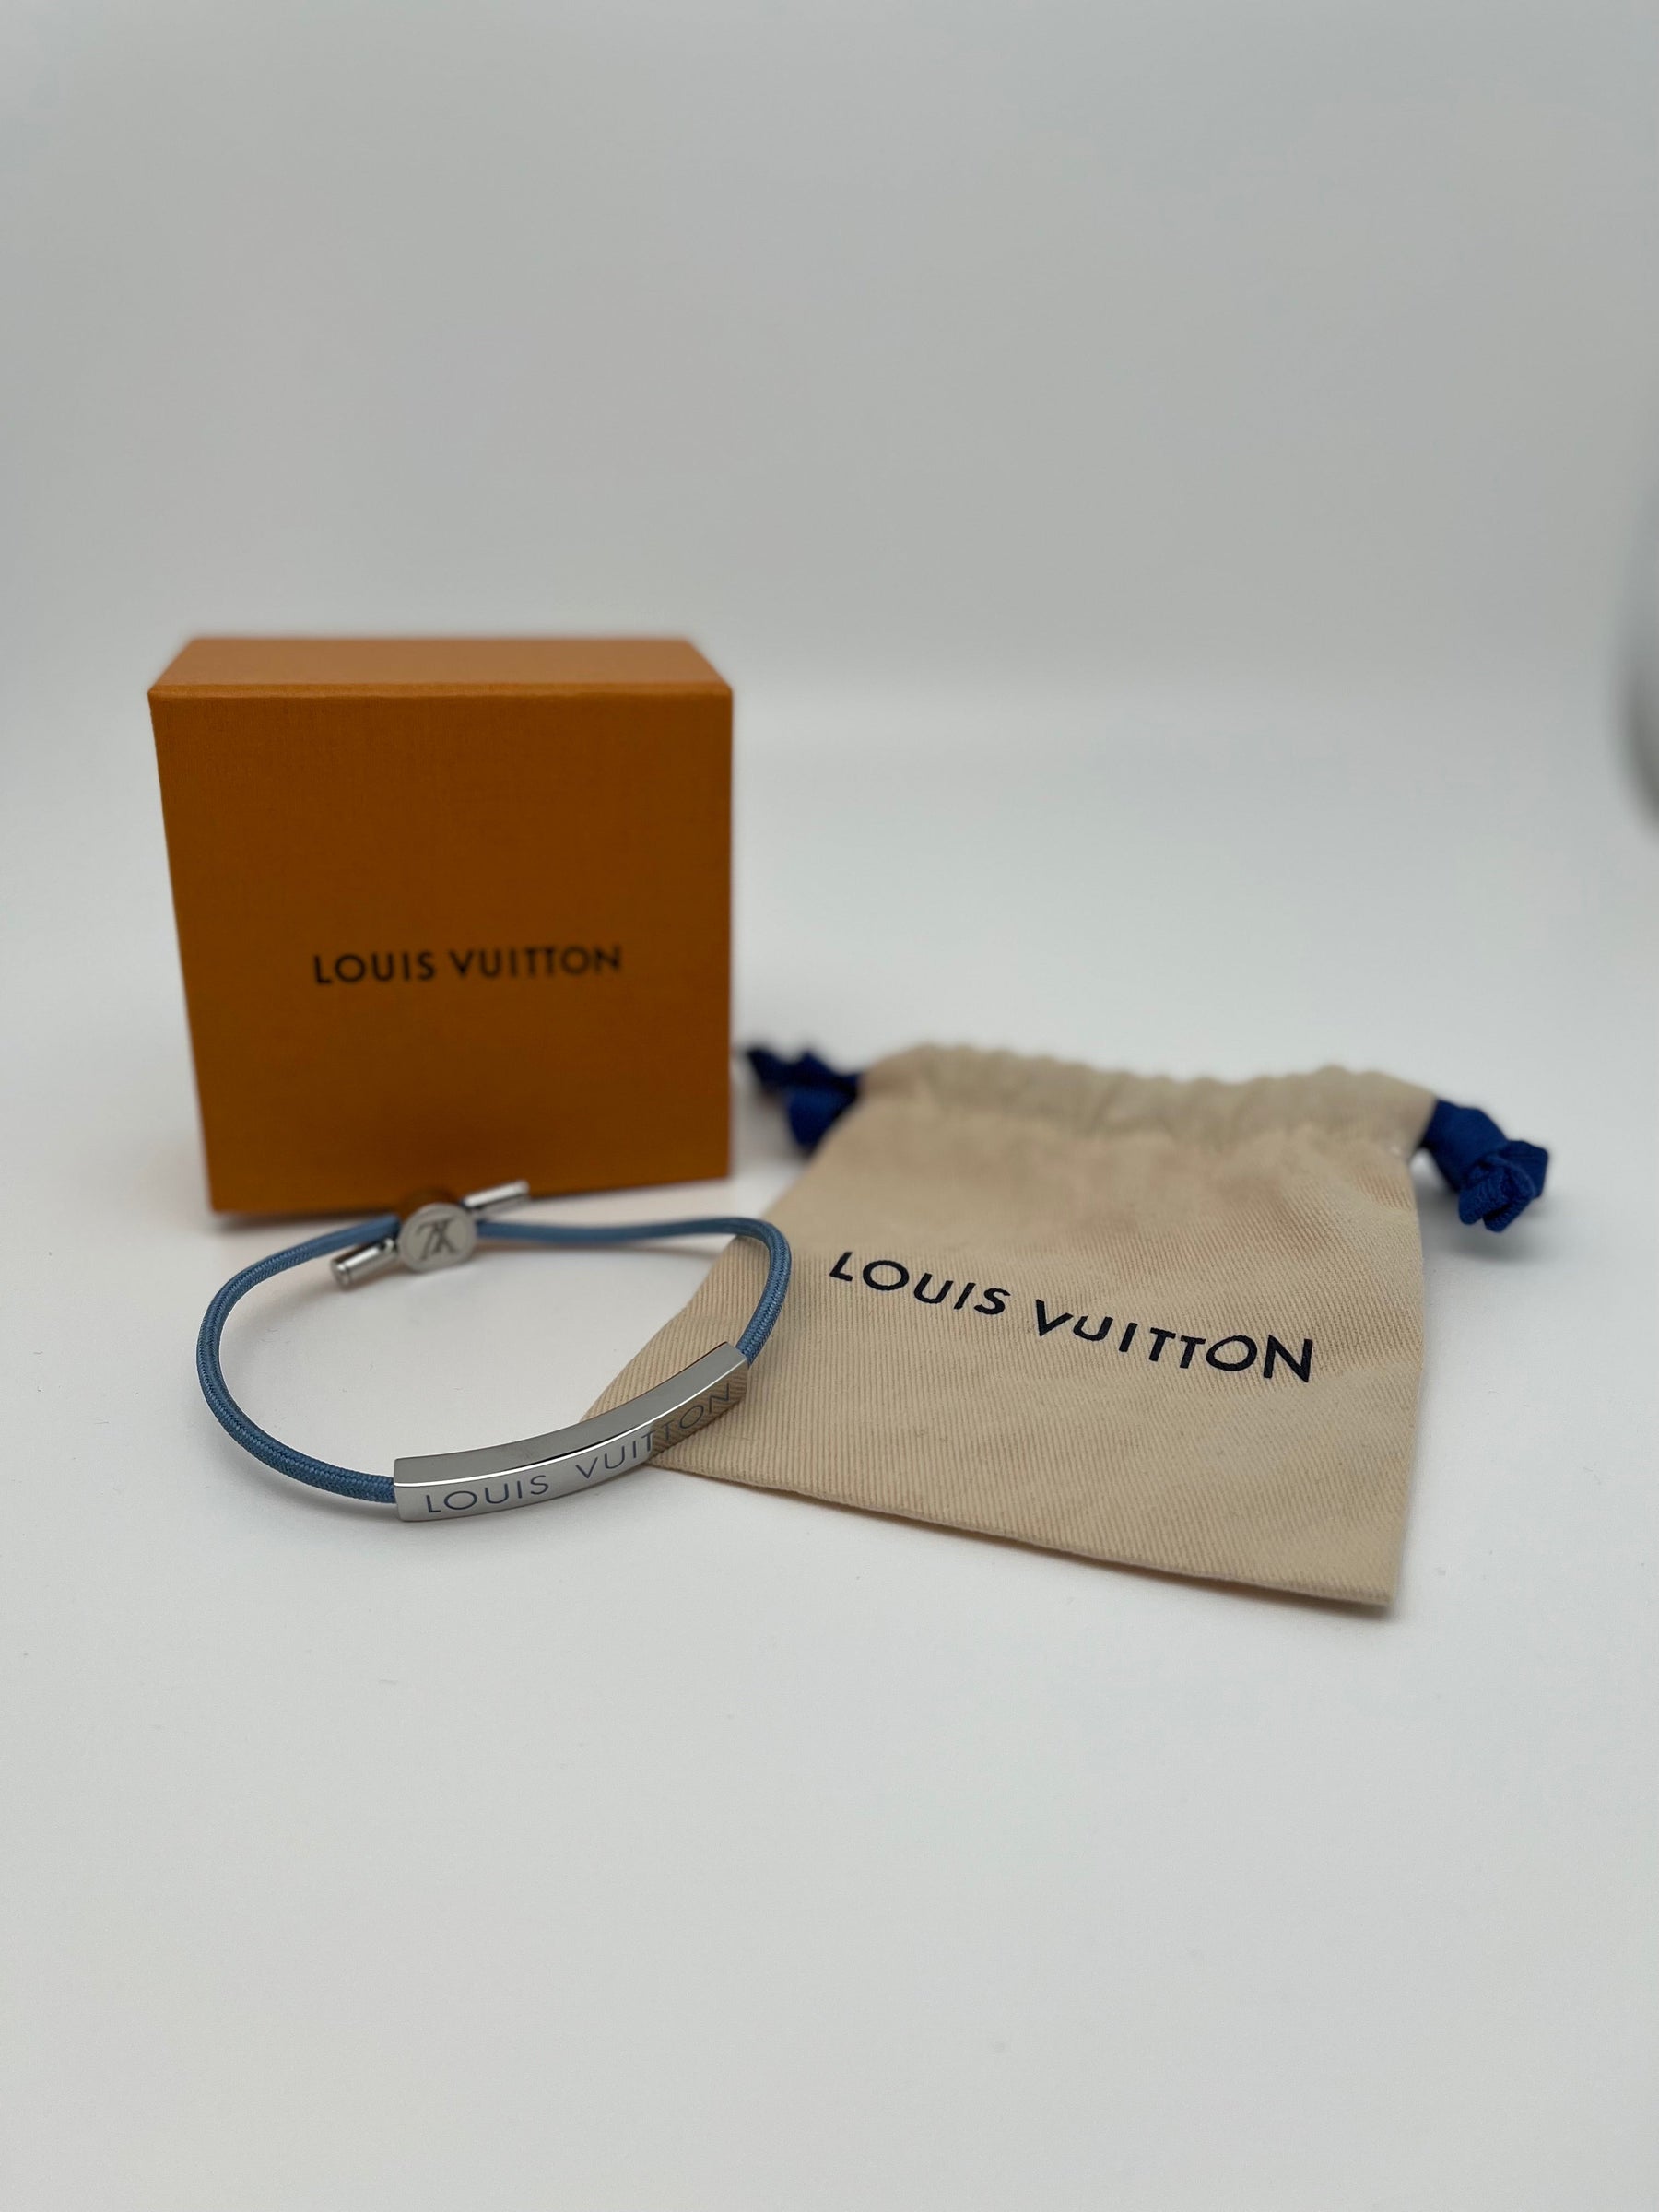 Louis Vuitton Space Bracelet | Palladium-Plated & Brass | Light Blue Cord | Adjustable | Excellent Condition | Box & Jewelry Pouch Included